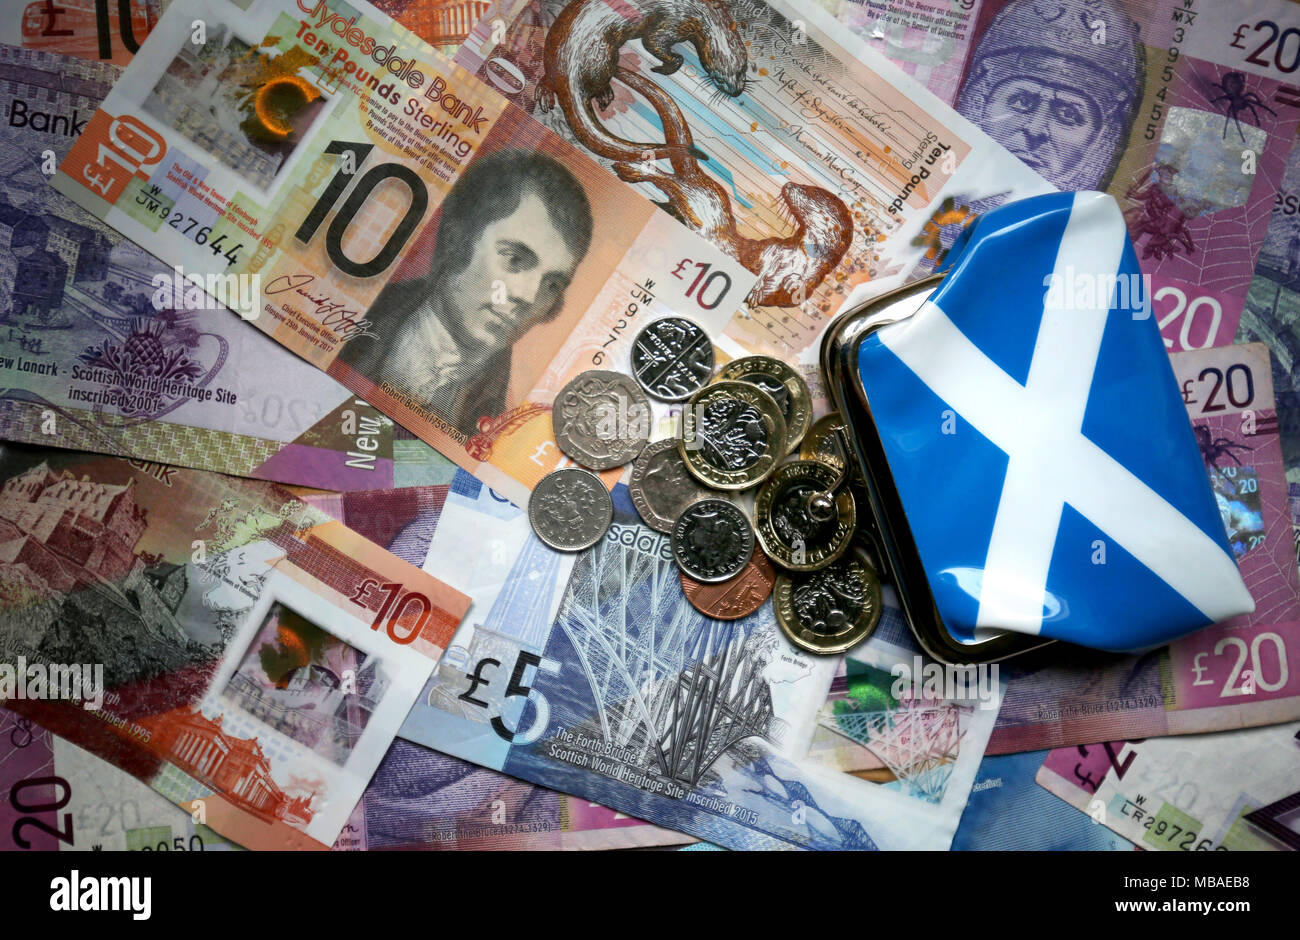 Coins and Scottish bank notes. Stock Photo